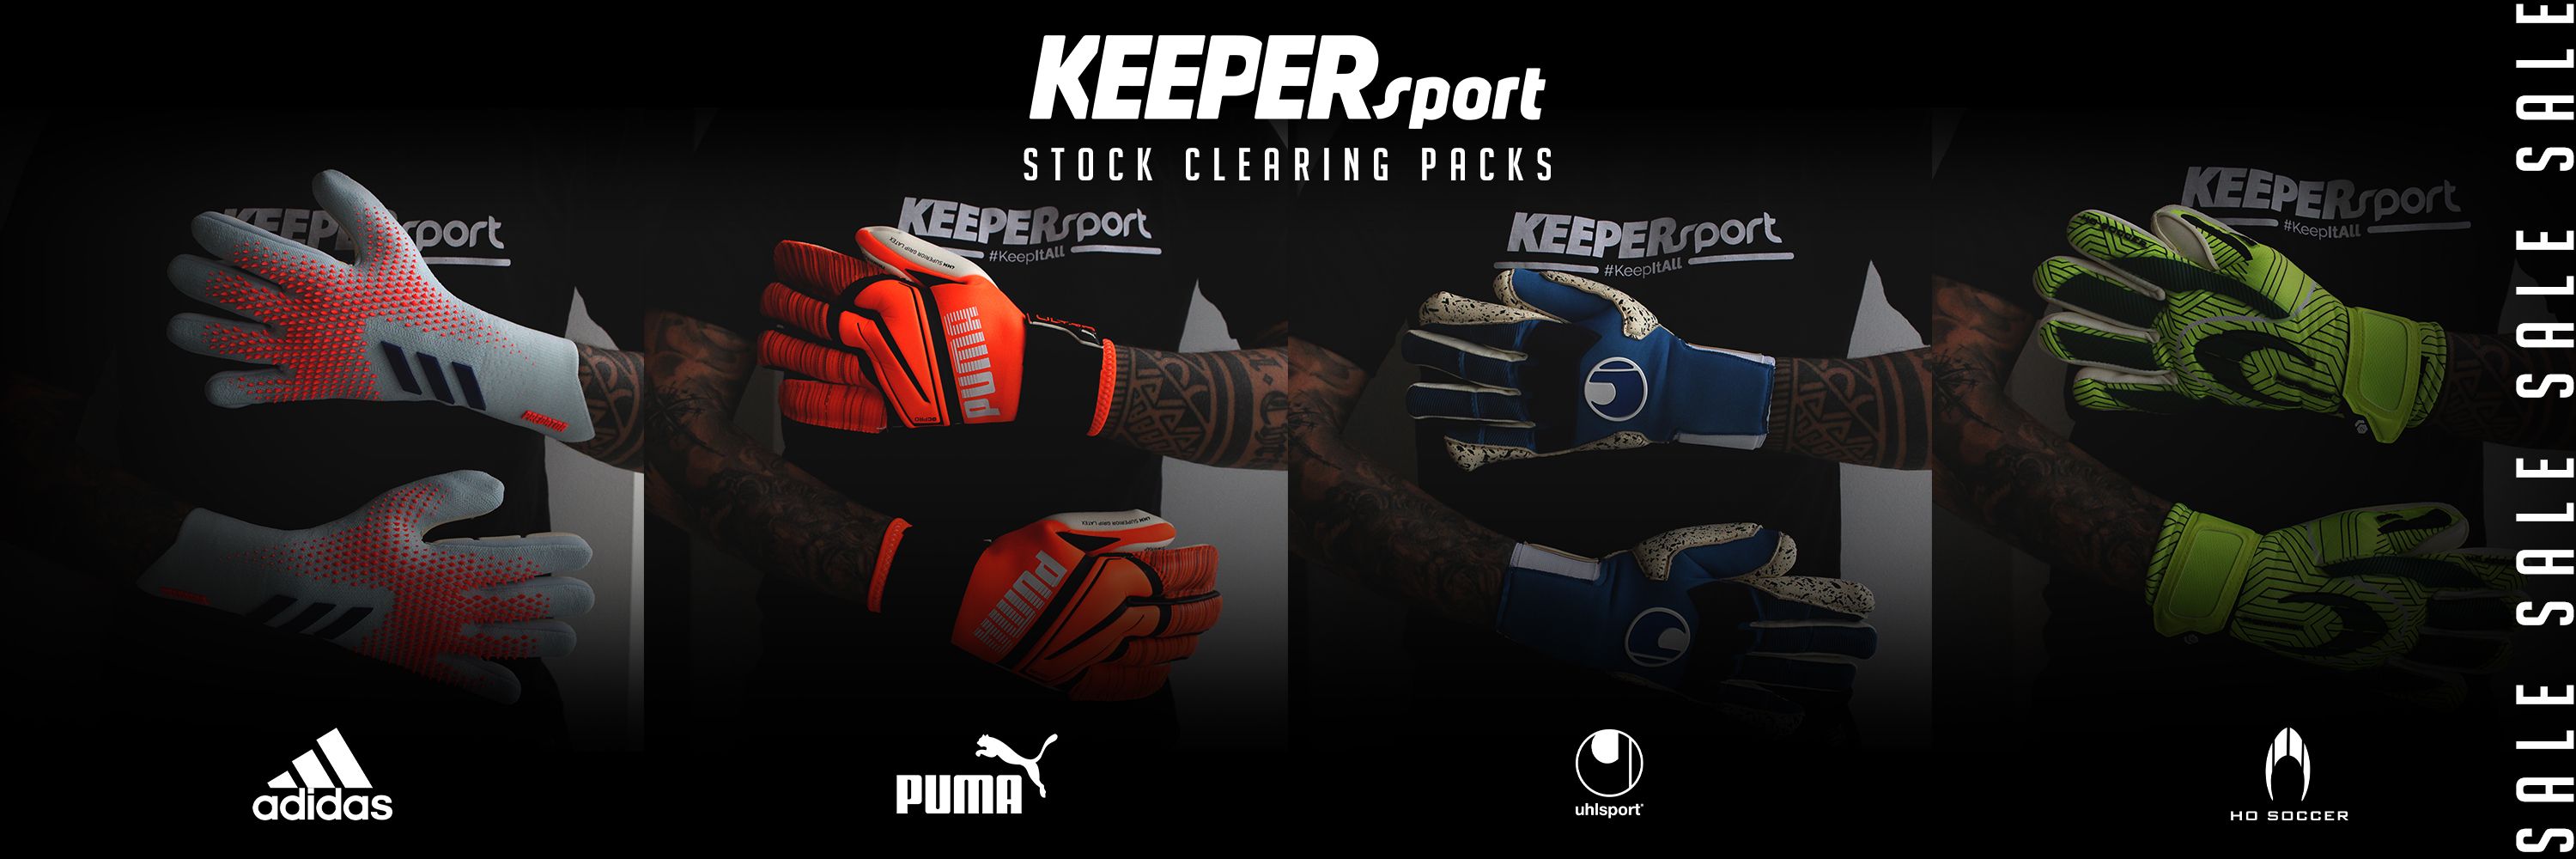 Stock Clearing at KEEPERsport